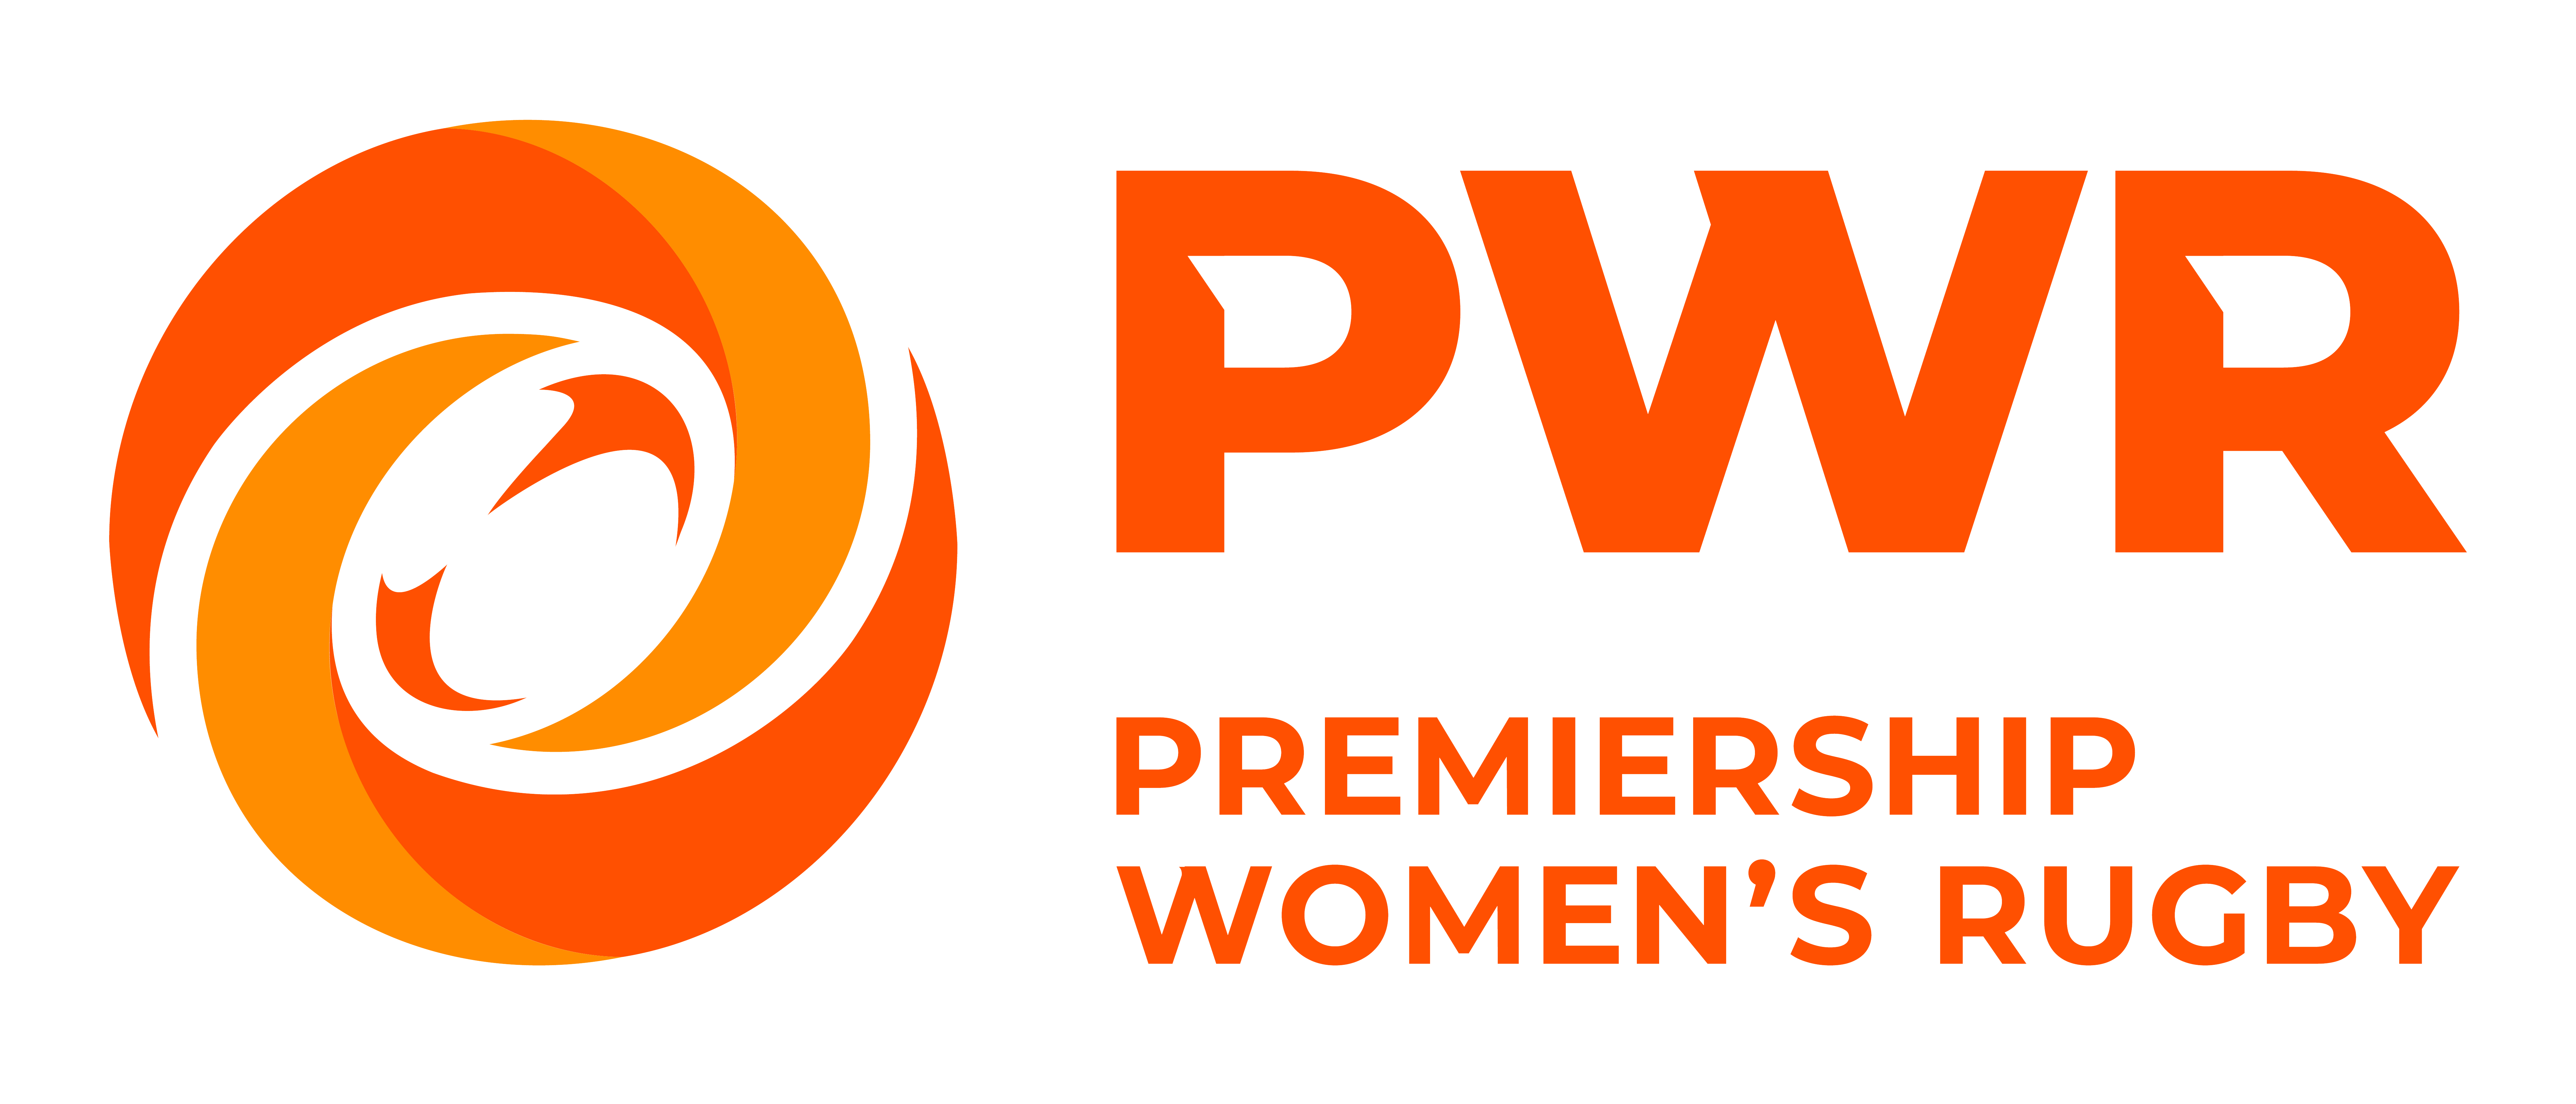 Premiership Womens Rugby